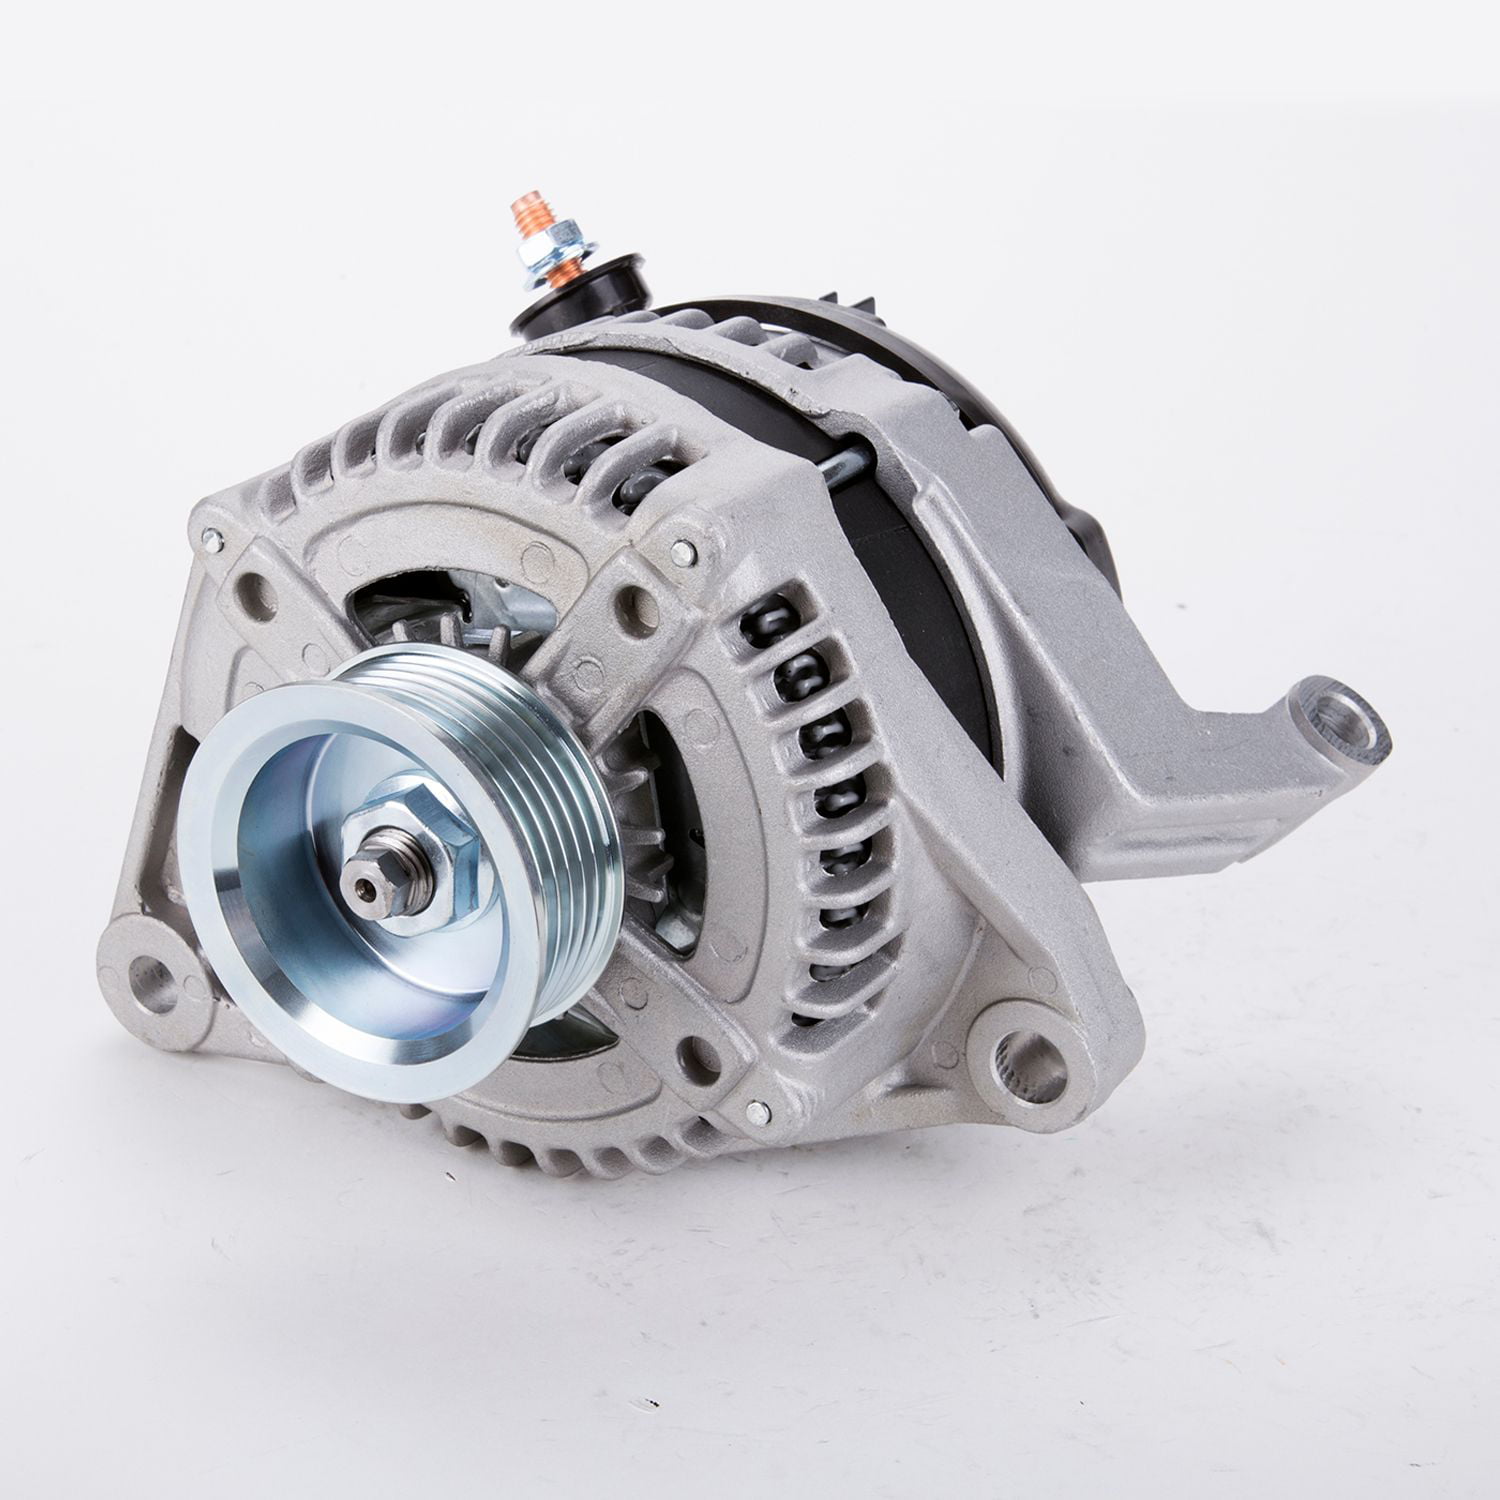 Details about   100% TYC Brand New Alternator Fits for Jeep Grand Cherokee 560299114AG 07-10